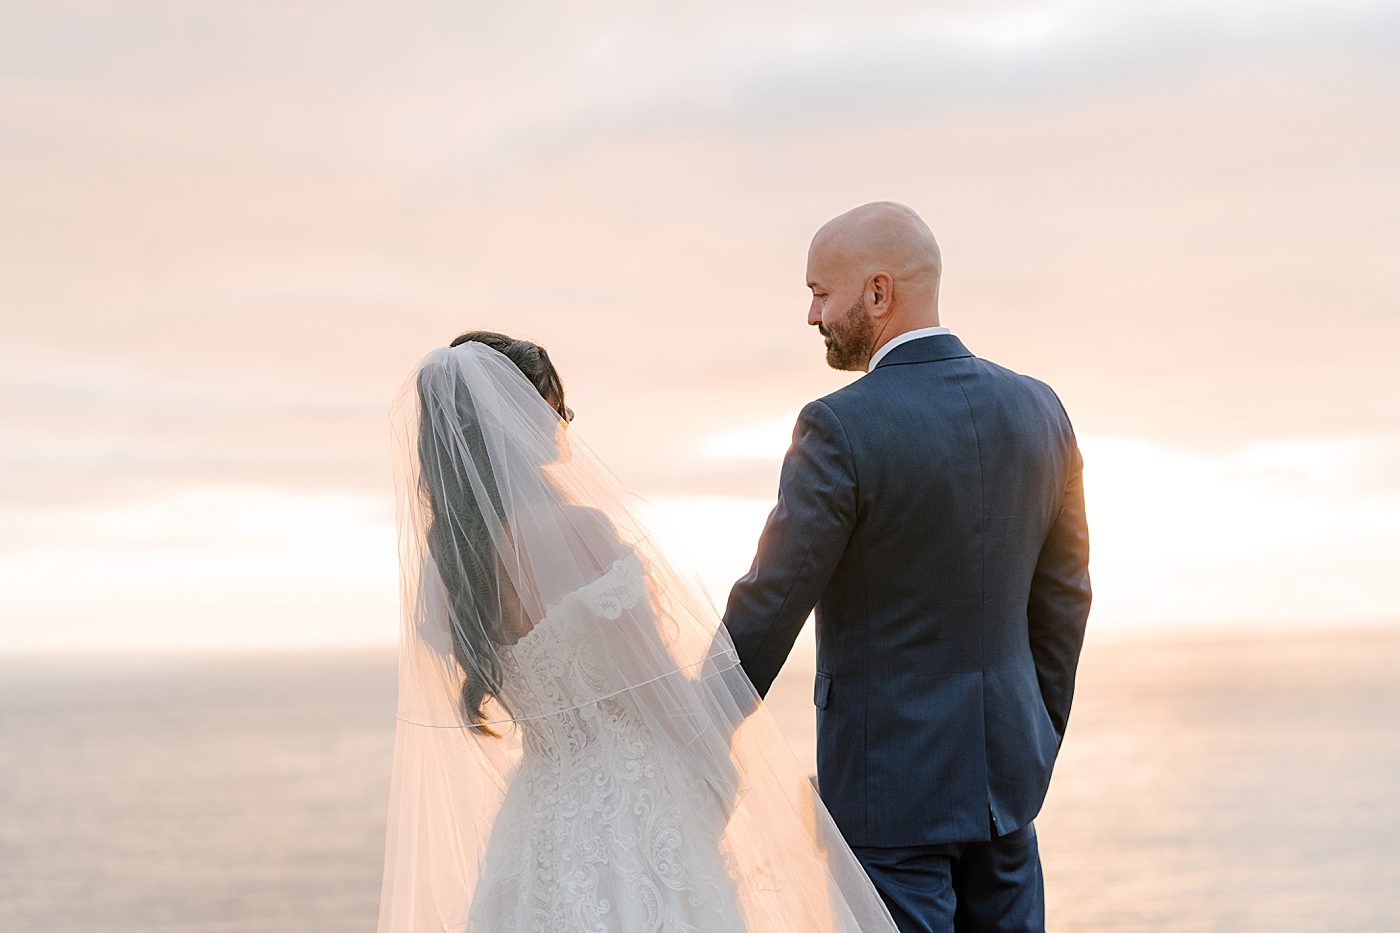 Groom in navy suit and bride in wedding dress facing away from the camera, looking at each other, and holding each other's hands on a seaside path at sunset | Image by Hope Helmuth Photography